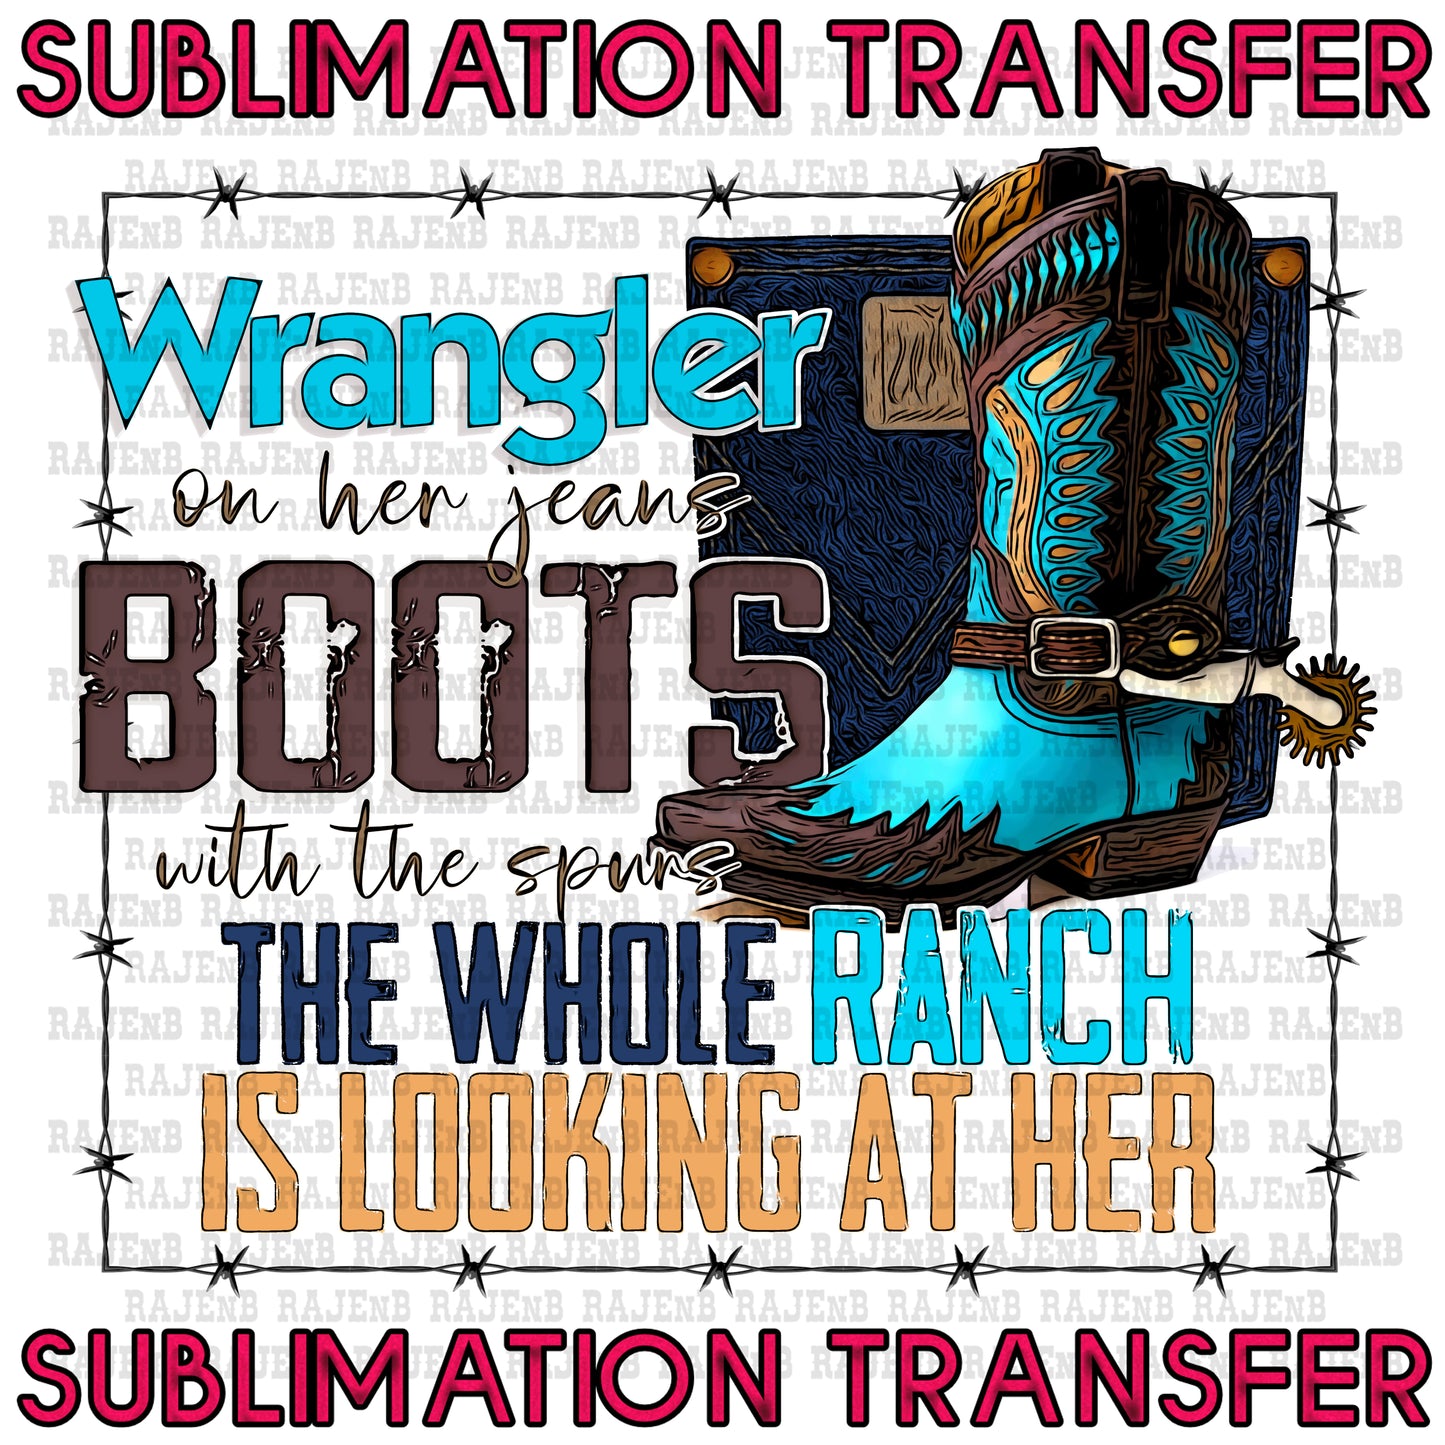 Wrangler on her jeans - SUBLIMATION TRANSFER 4021SUB